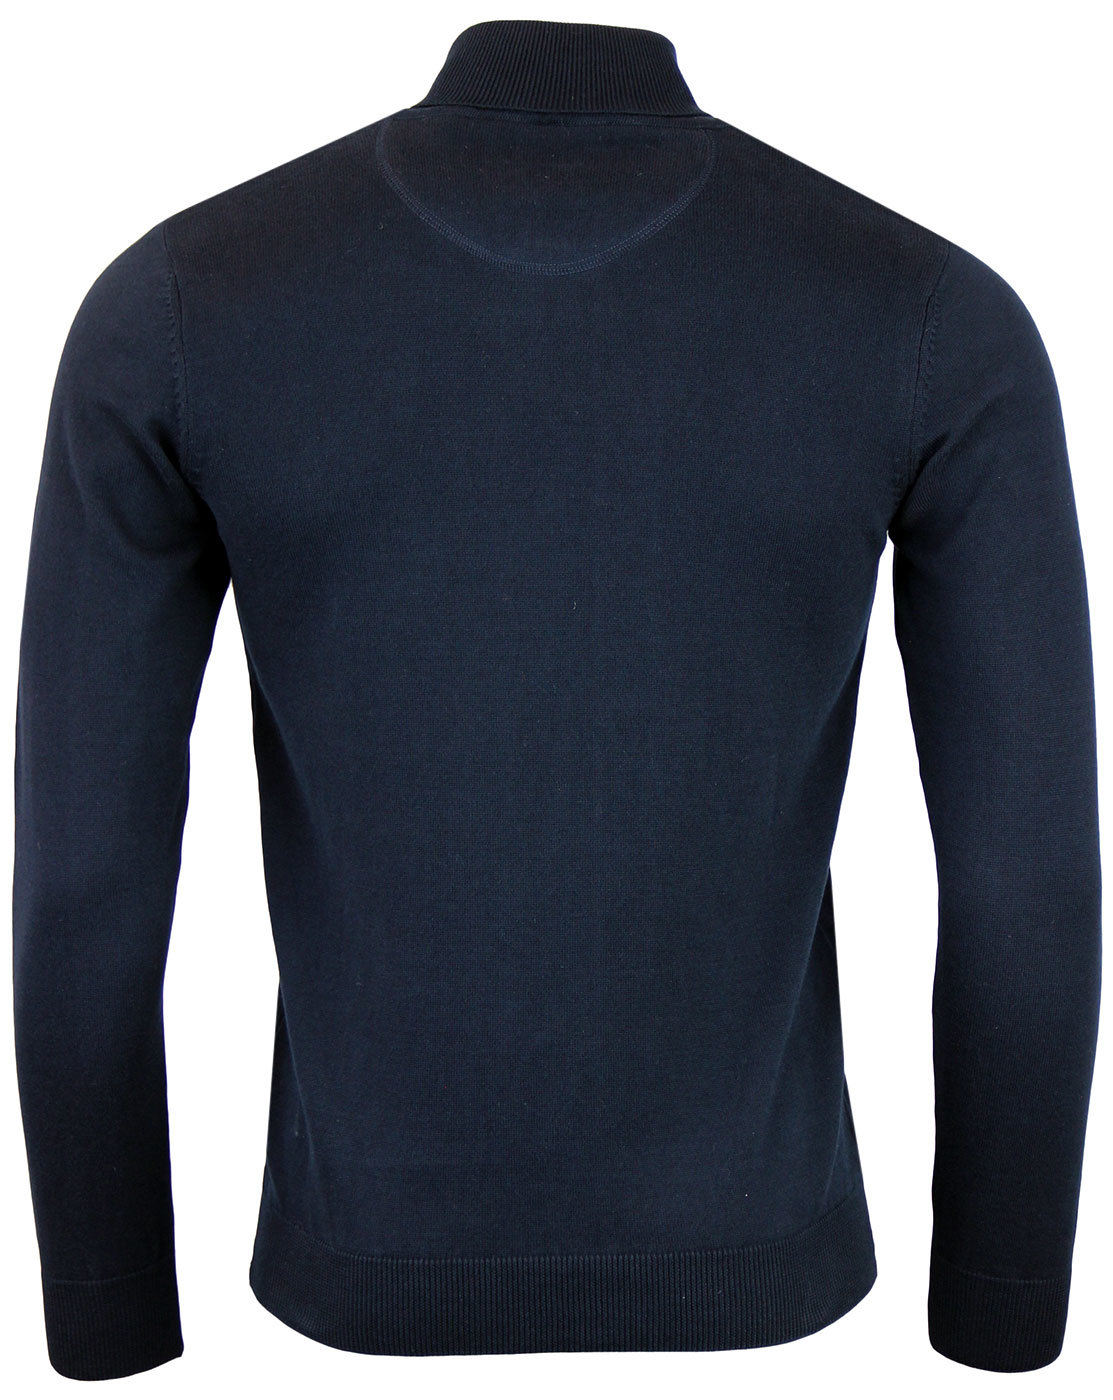 GUIDE LONDON Retro 1960s Mod Roll Neck Knitted Jumper in Navy